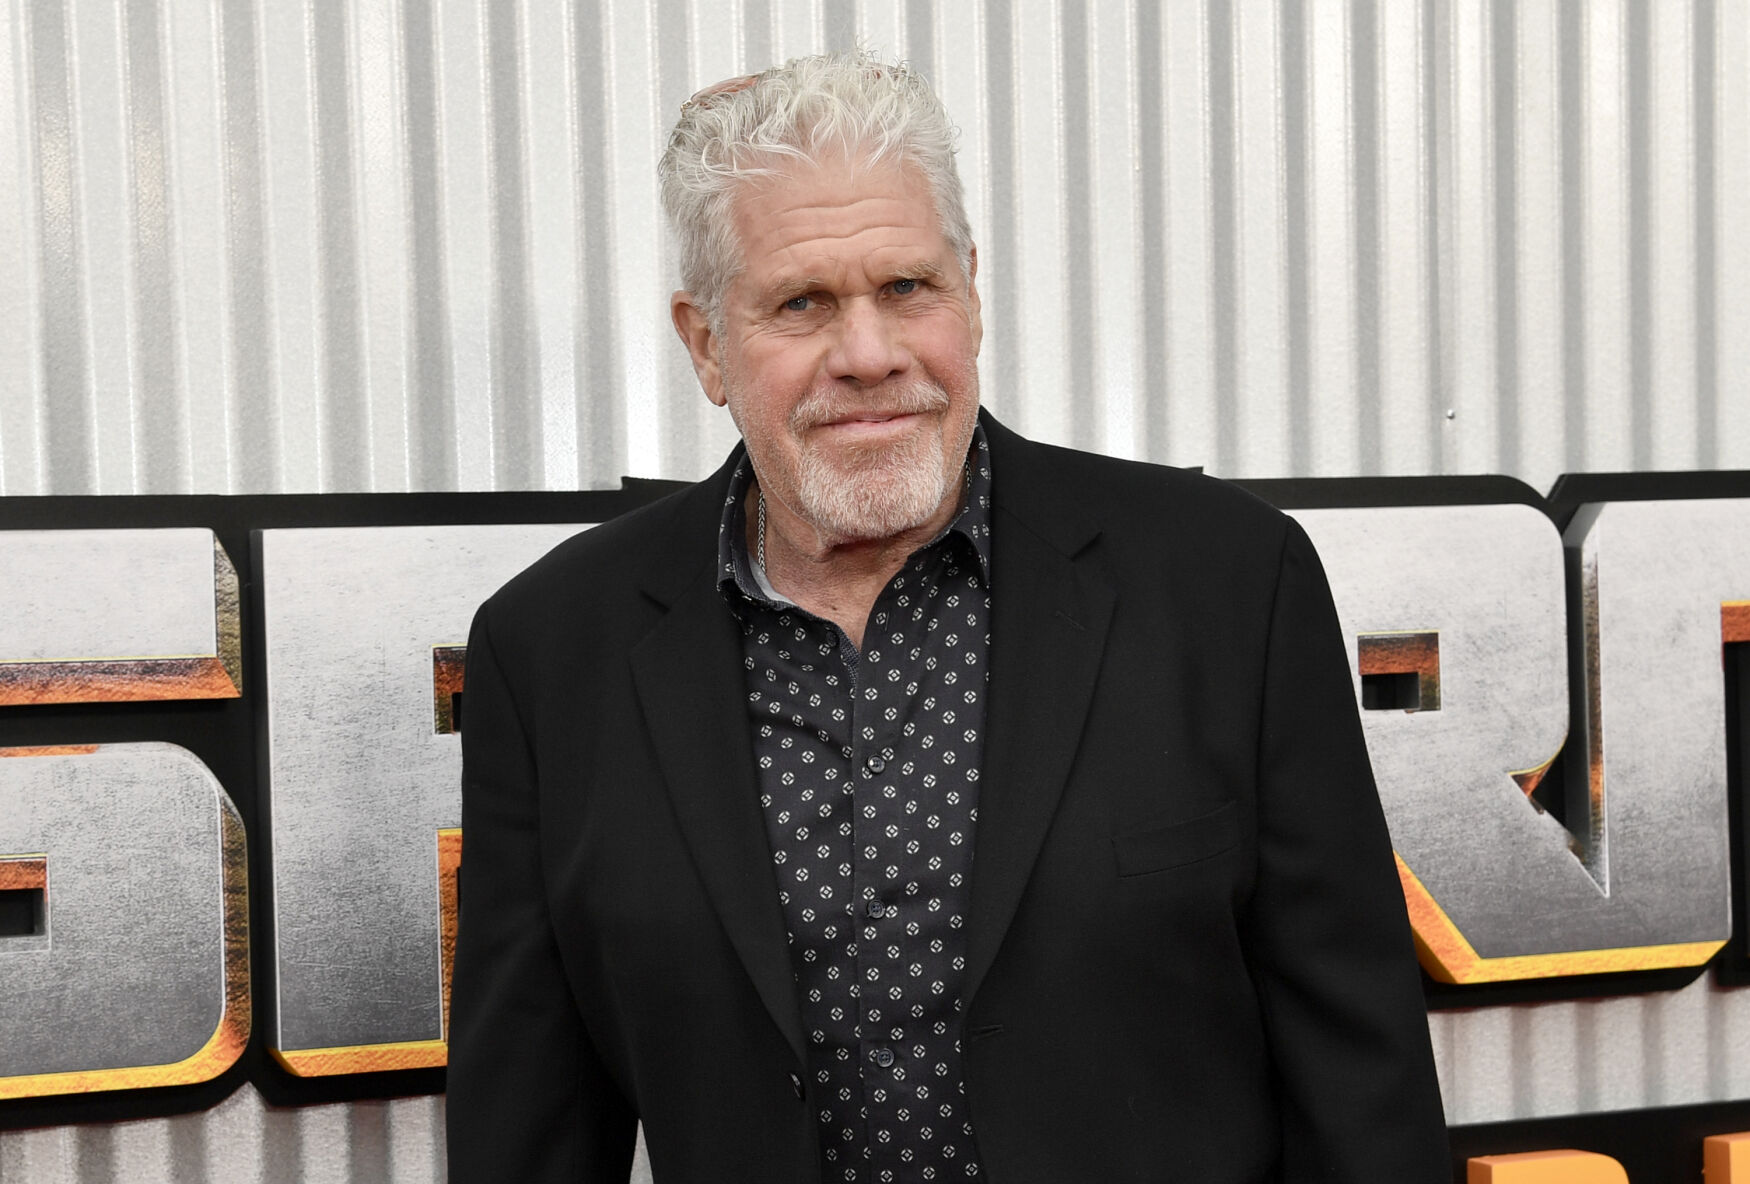 Ron Perlman at the premiere of "Transformers: Rise of the Beasts" held at Kings Theater on June 5, 2023 in New York City.